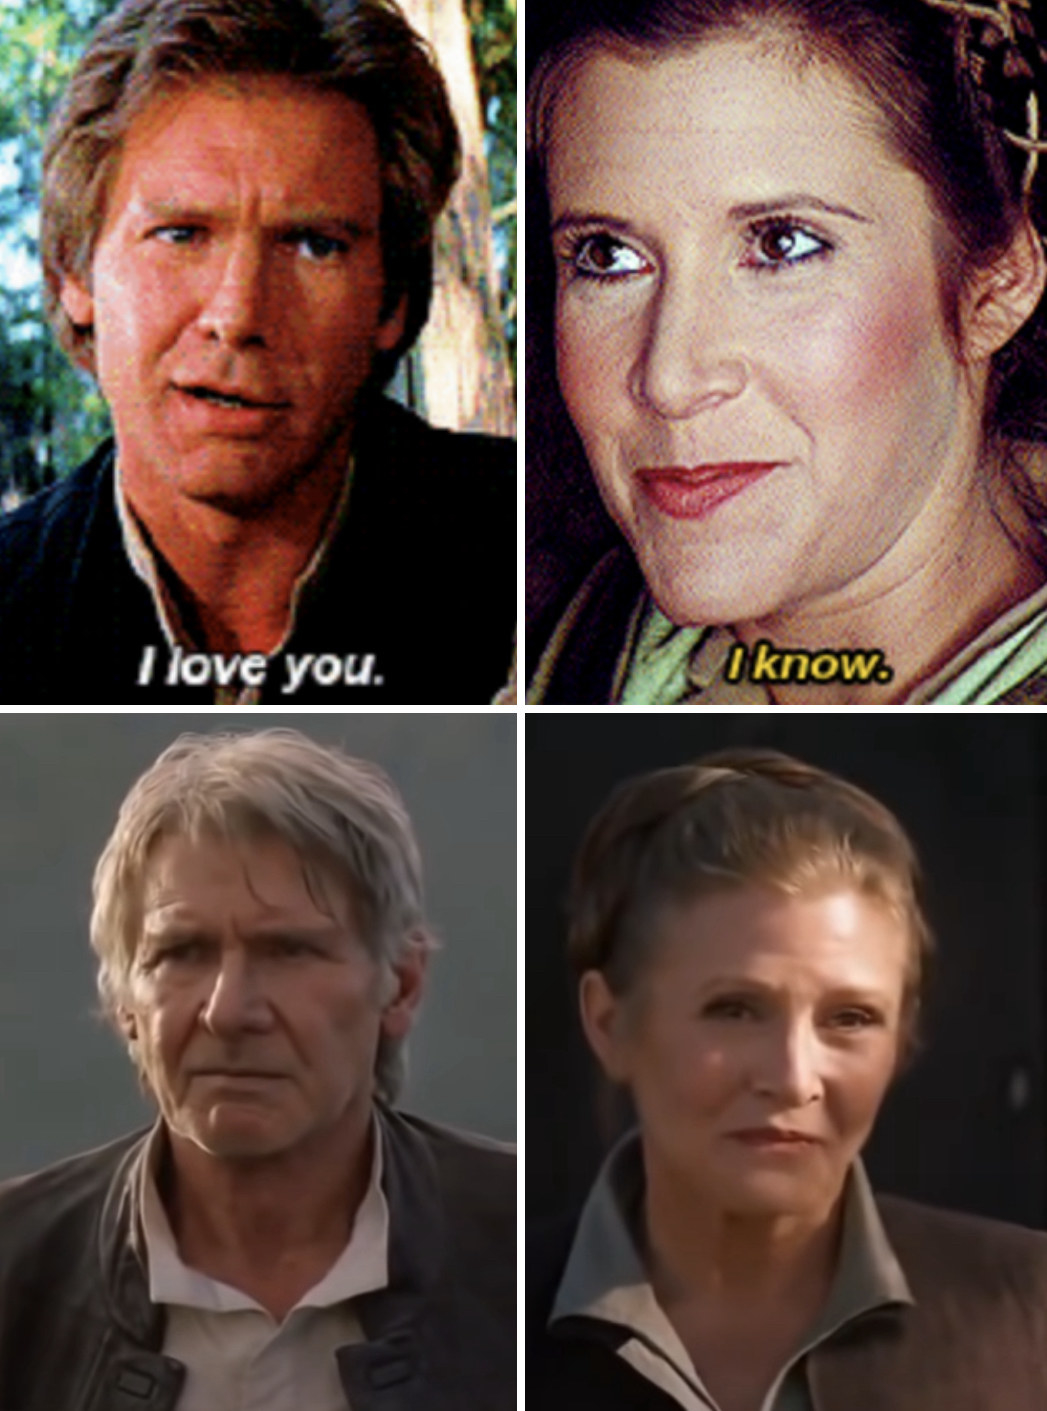 Carrie Fisher and Harrison Ford in &quot;Return of the Jedi&quot; vs. &quot;The Force Awakens&quot;